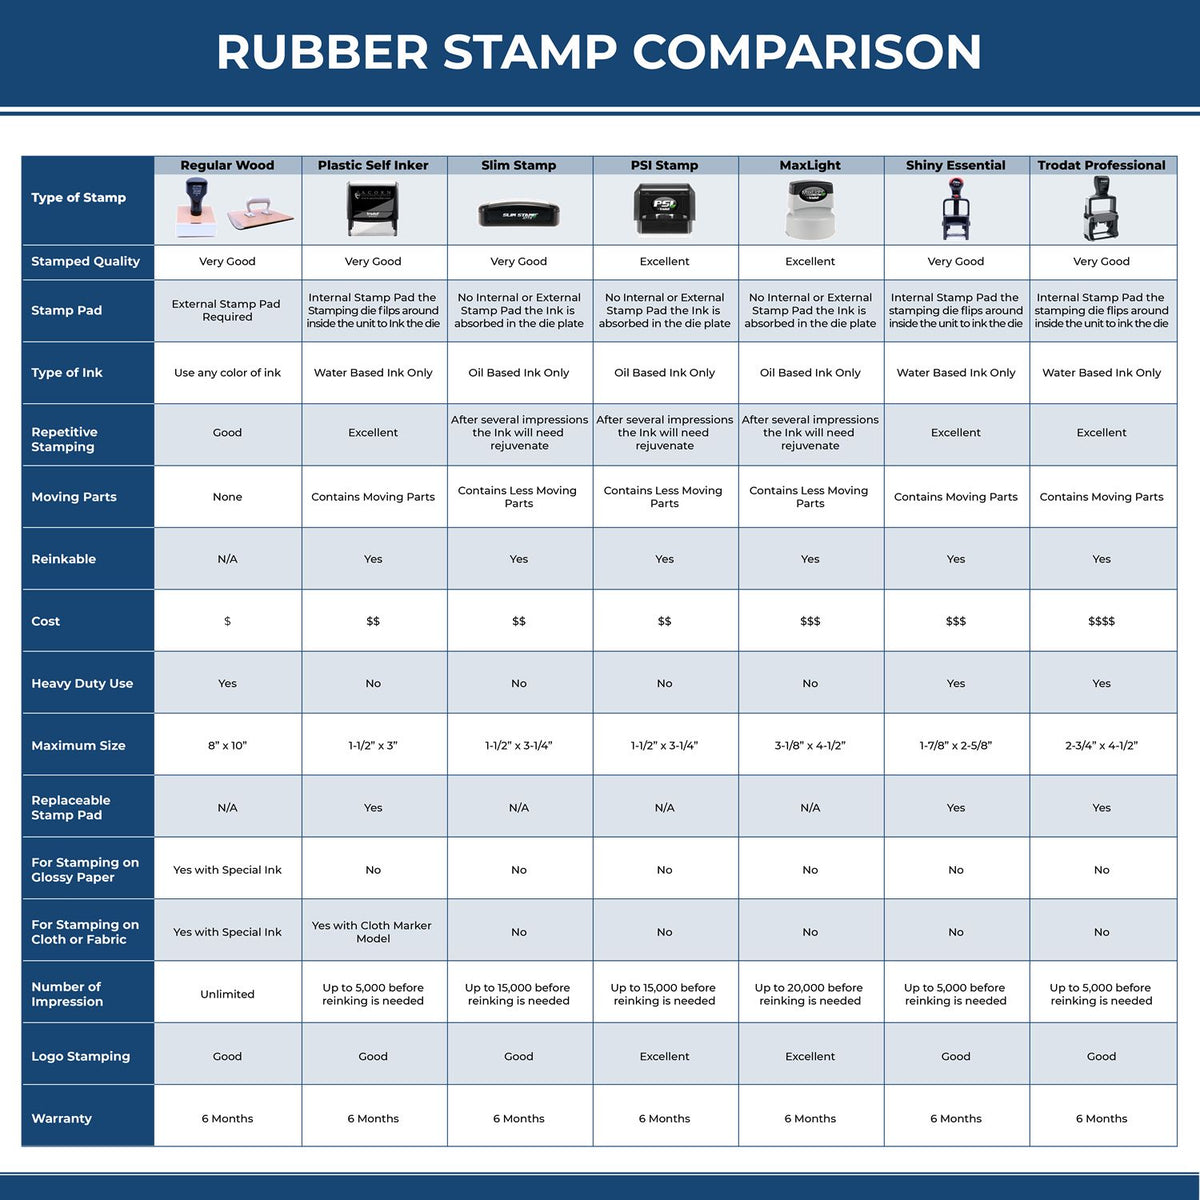 Large Dining Room Closed Rubber Stamp 5501R Rubber Stamp Comparison